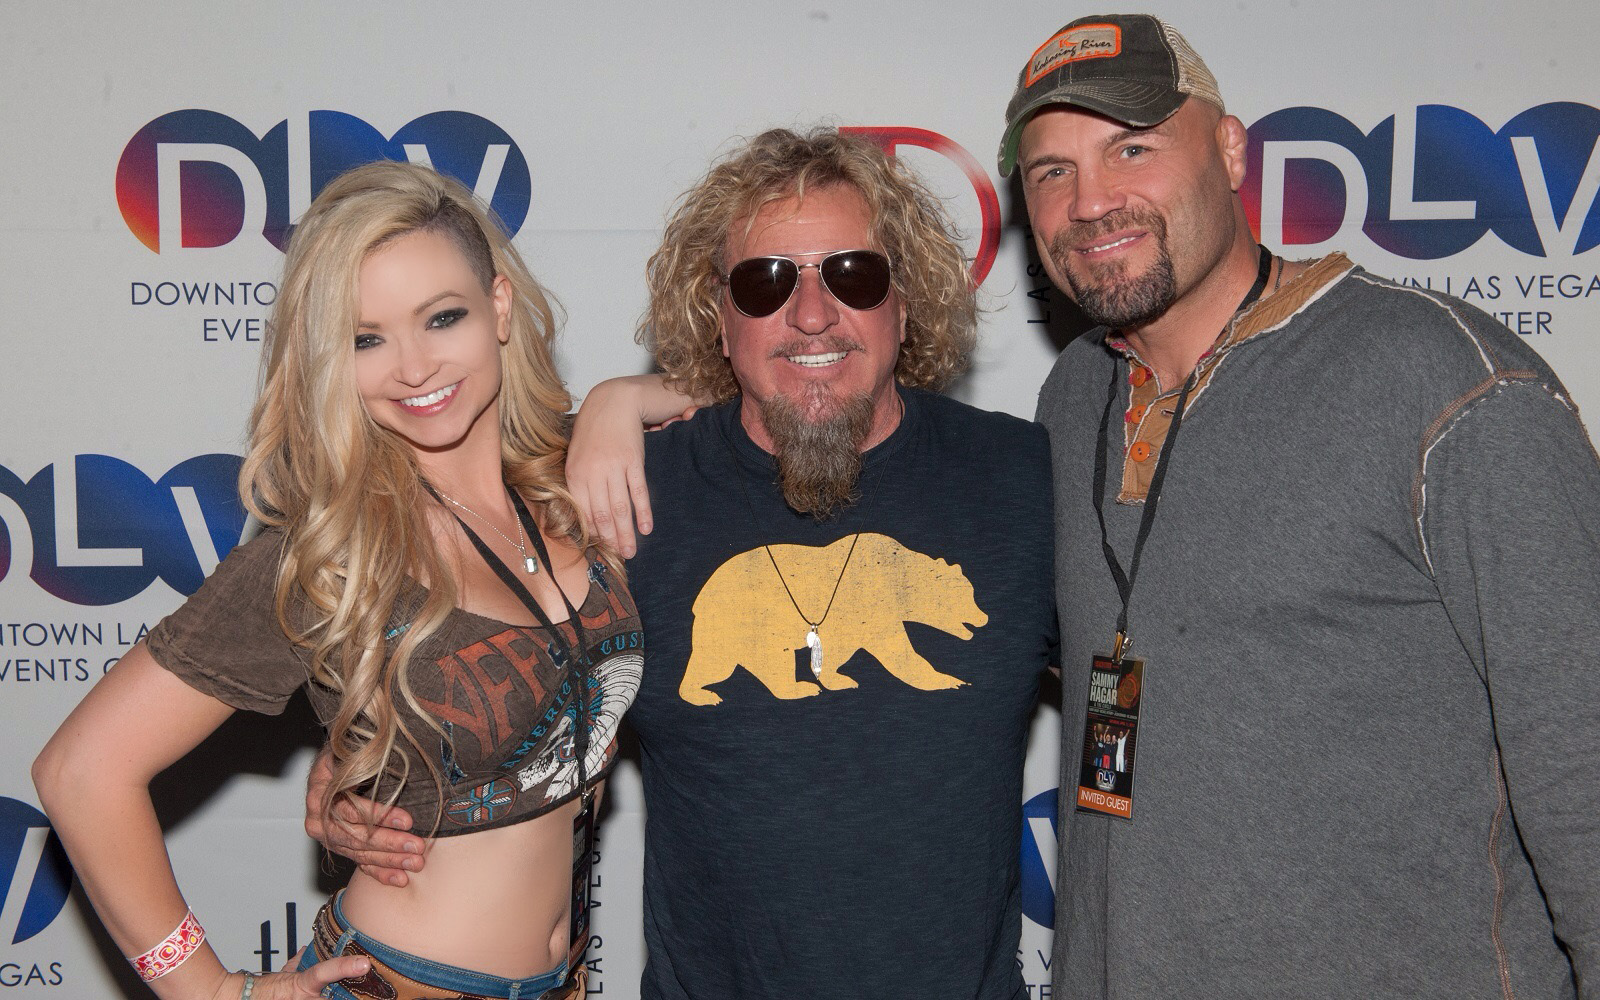 Sammy Hagar, Randy Couture, and Mindy Robinson at the Downtown Las Vegas Event Center. April 10, 2015